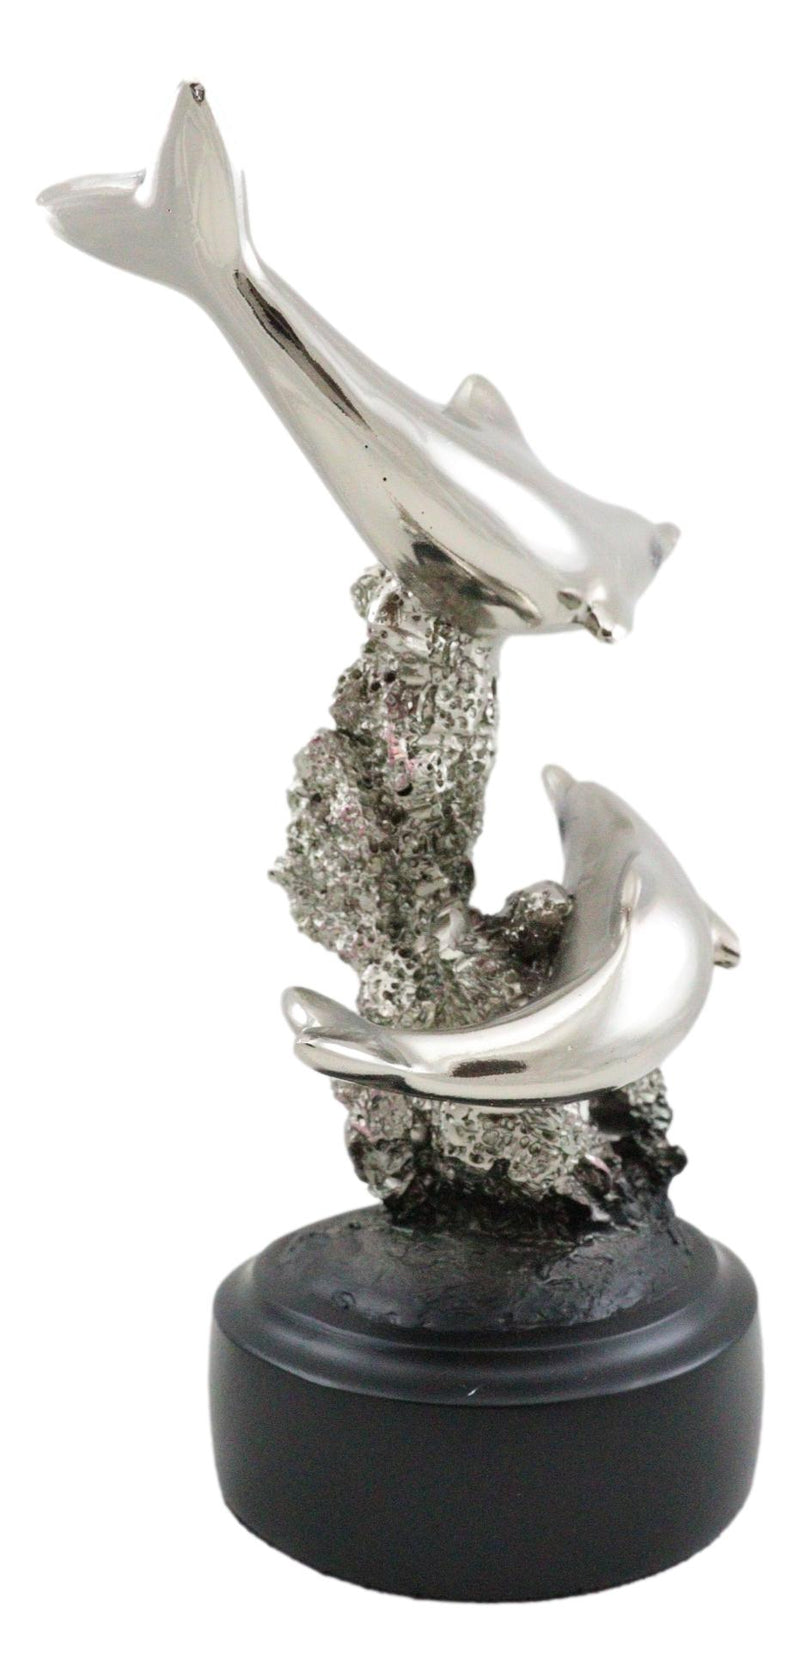 Nautical Marine Sea Gay Dolphins By Coral Reef Silver Electroplated Figurine